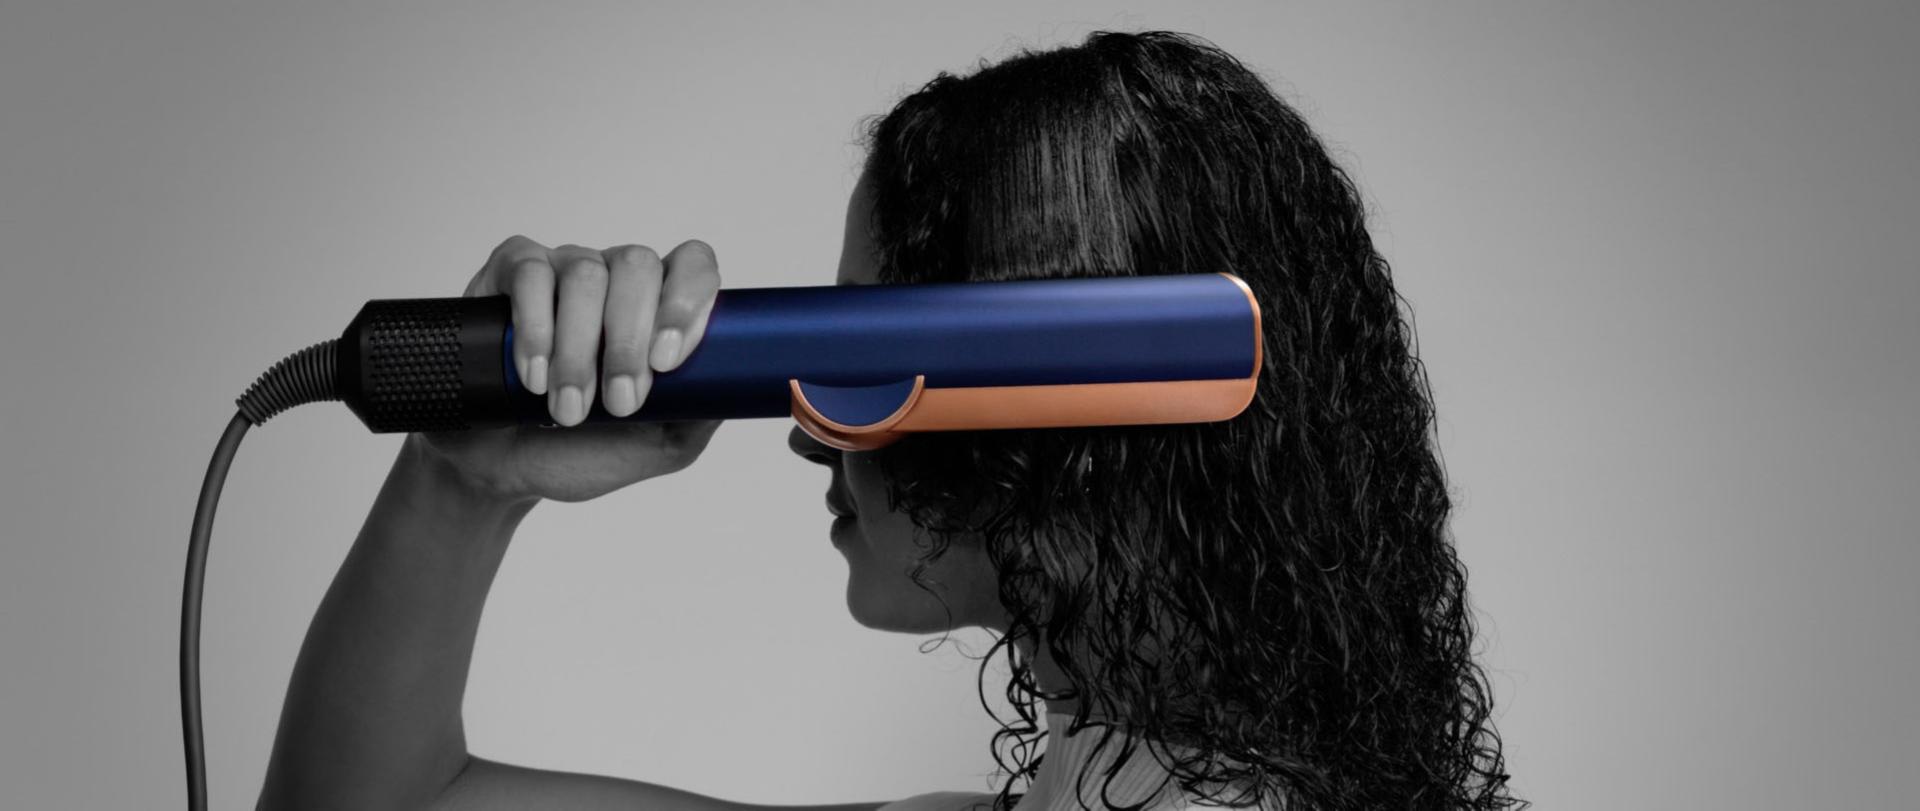 A woman using a Dyson Airstrait straightener to dry and straighten a tress of her hair.